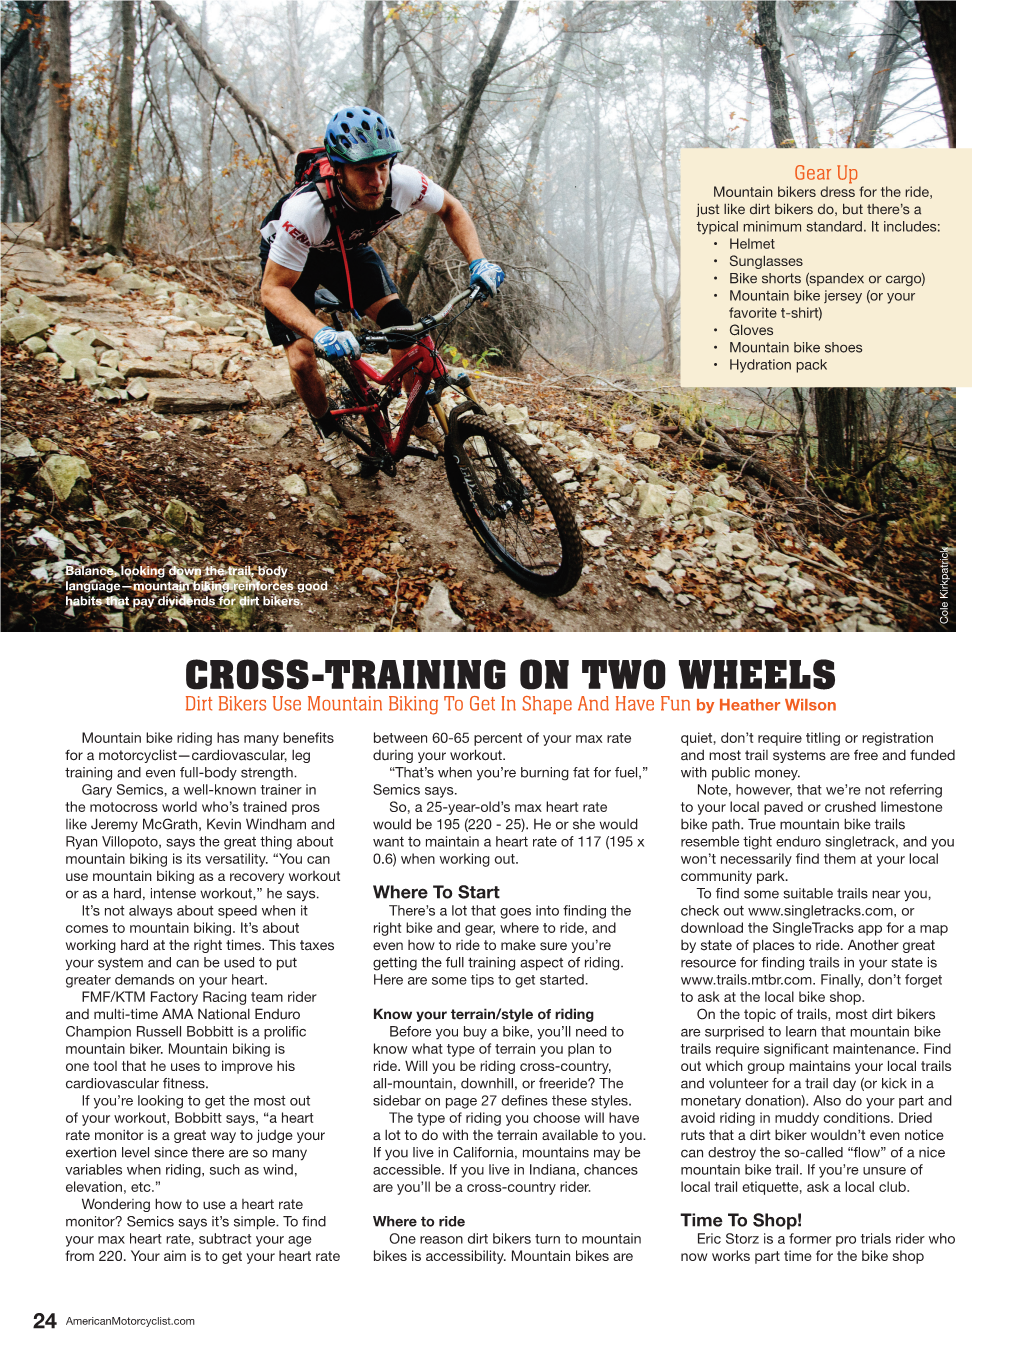 CROSS-TRAINING on TWO WHEELS Dirt Bikers Use Mountain Biking to Get in Shape and Have Fun by Heather Wilson